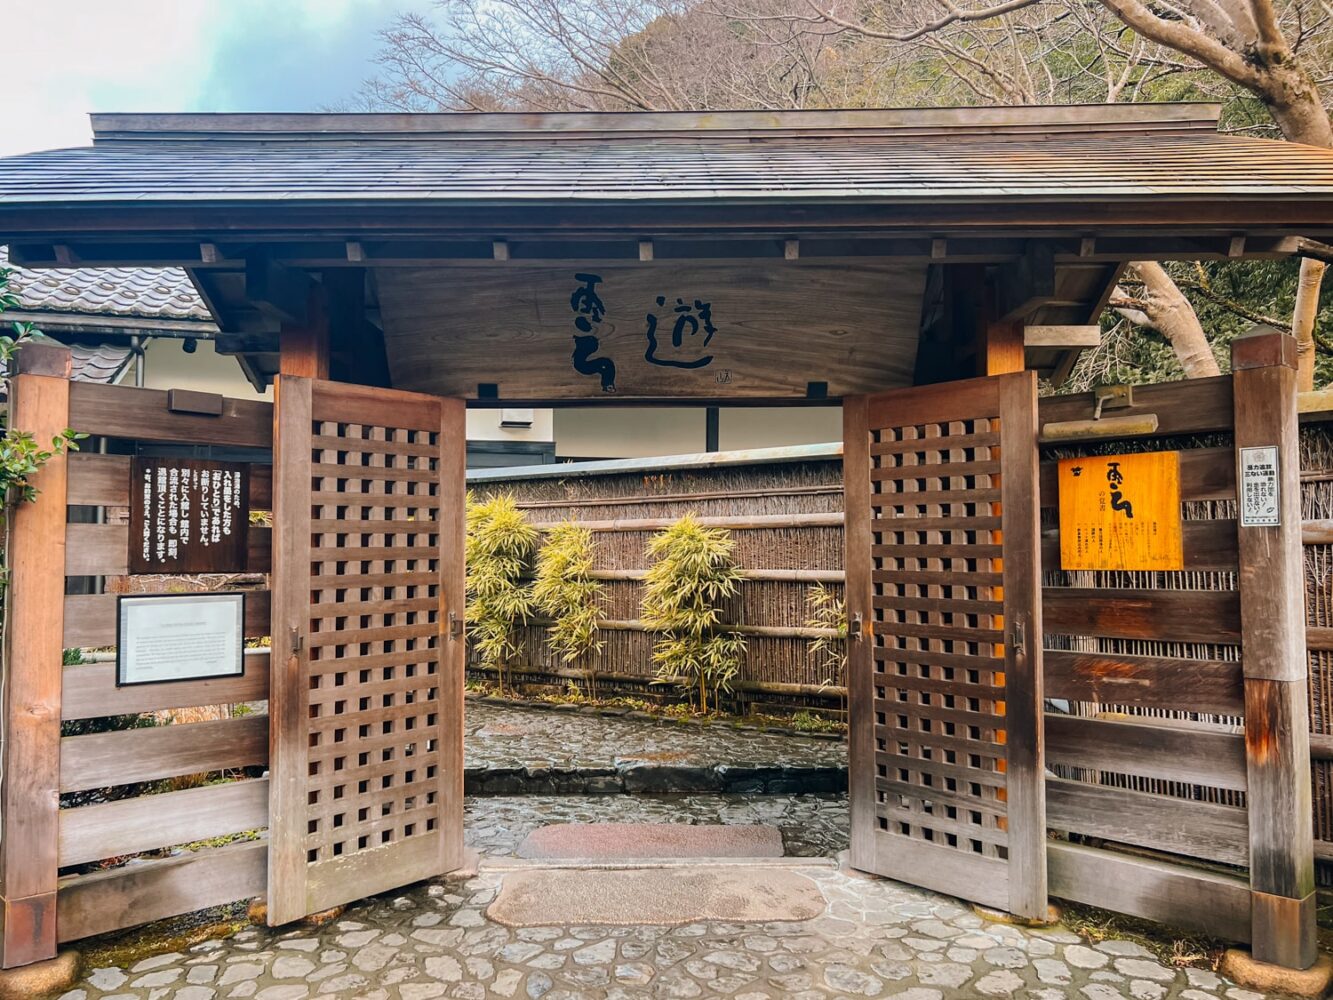 The entrance/exit gate to the Tenzan Onsen with traditional Japanese-style architecture.